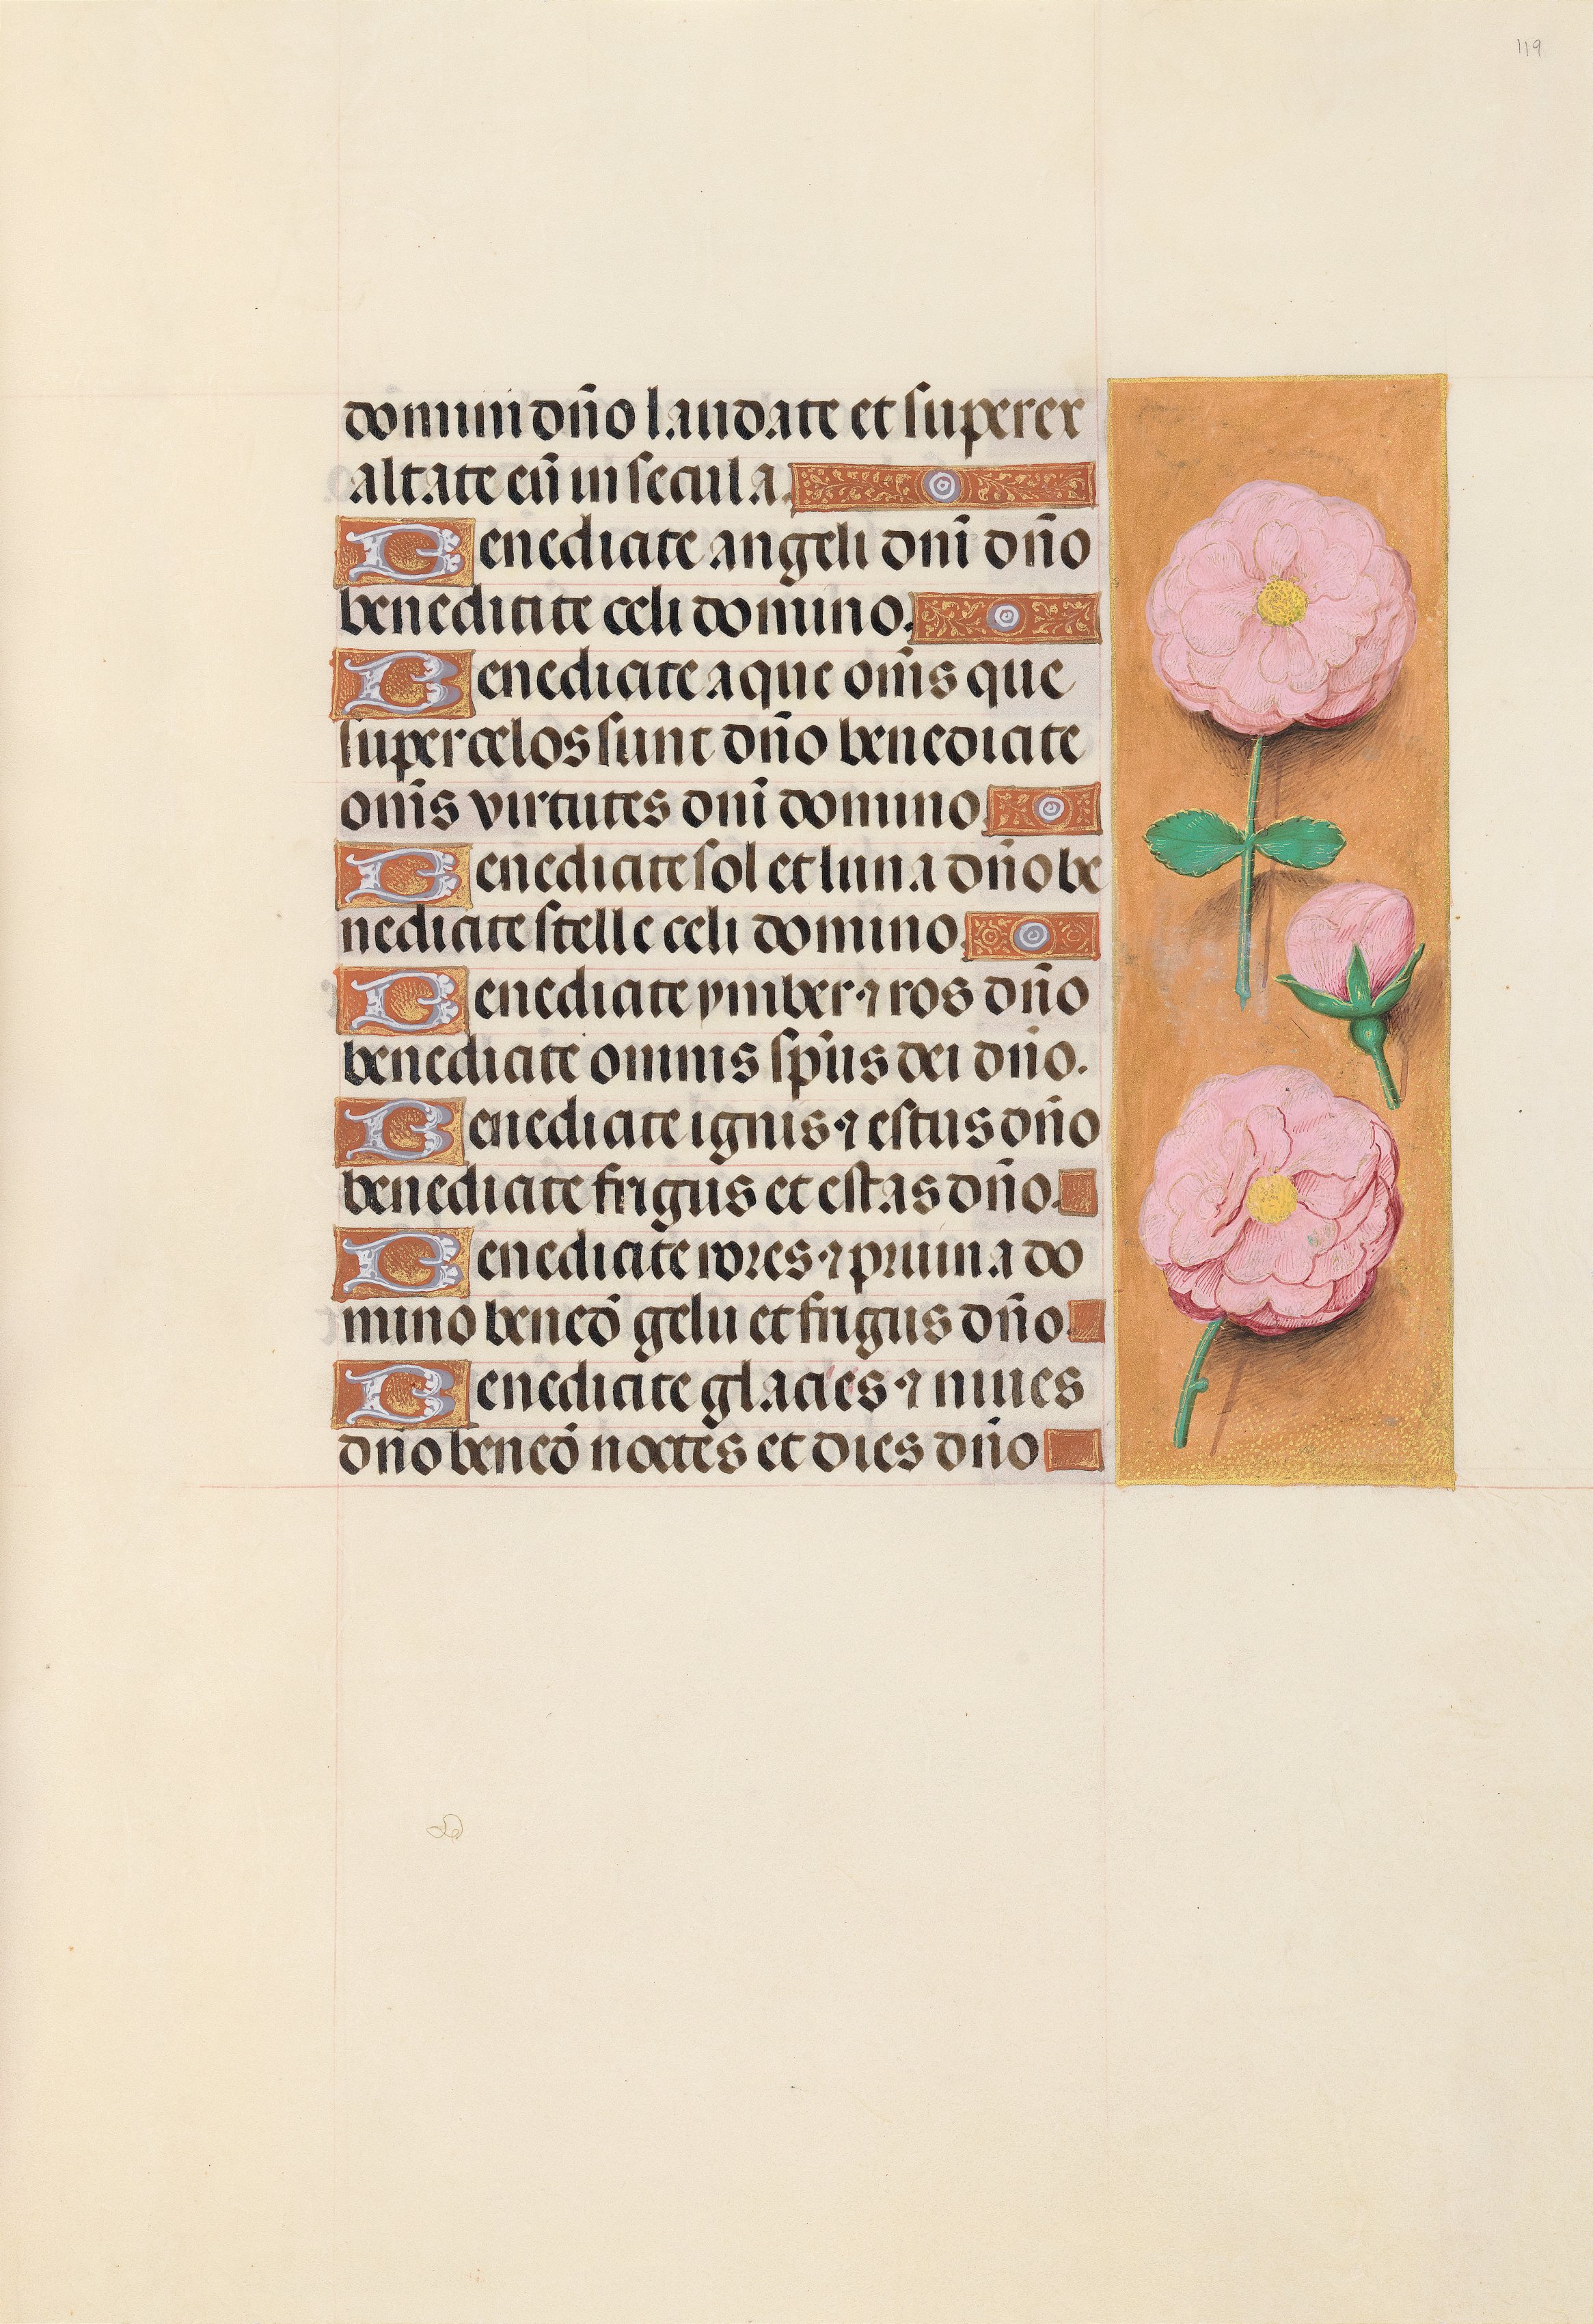 Hours of Queen Isabella the Catholic, Queen of Spain:  Fol. 119r